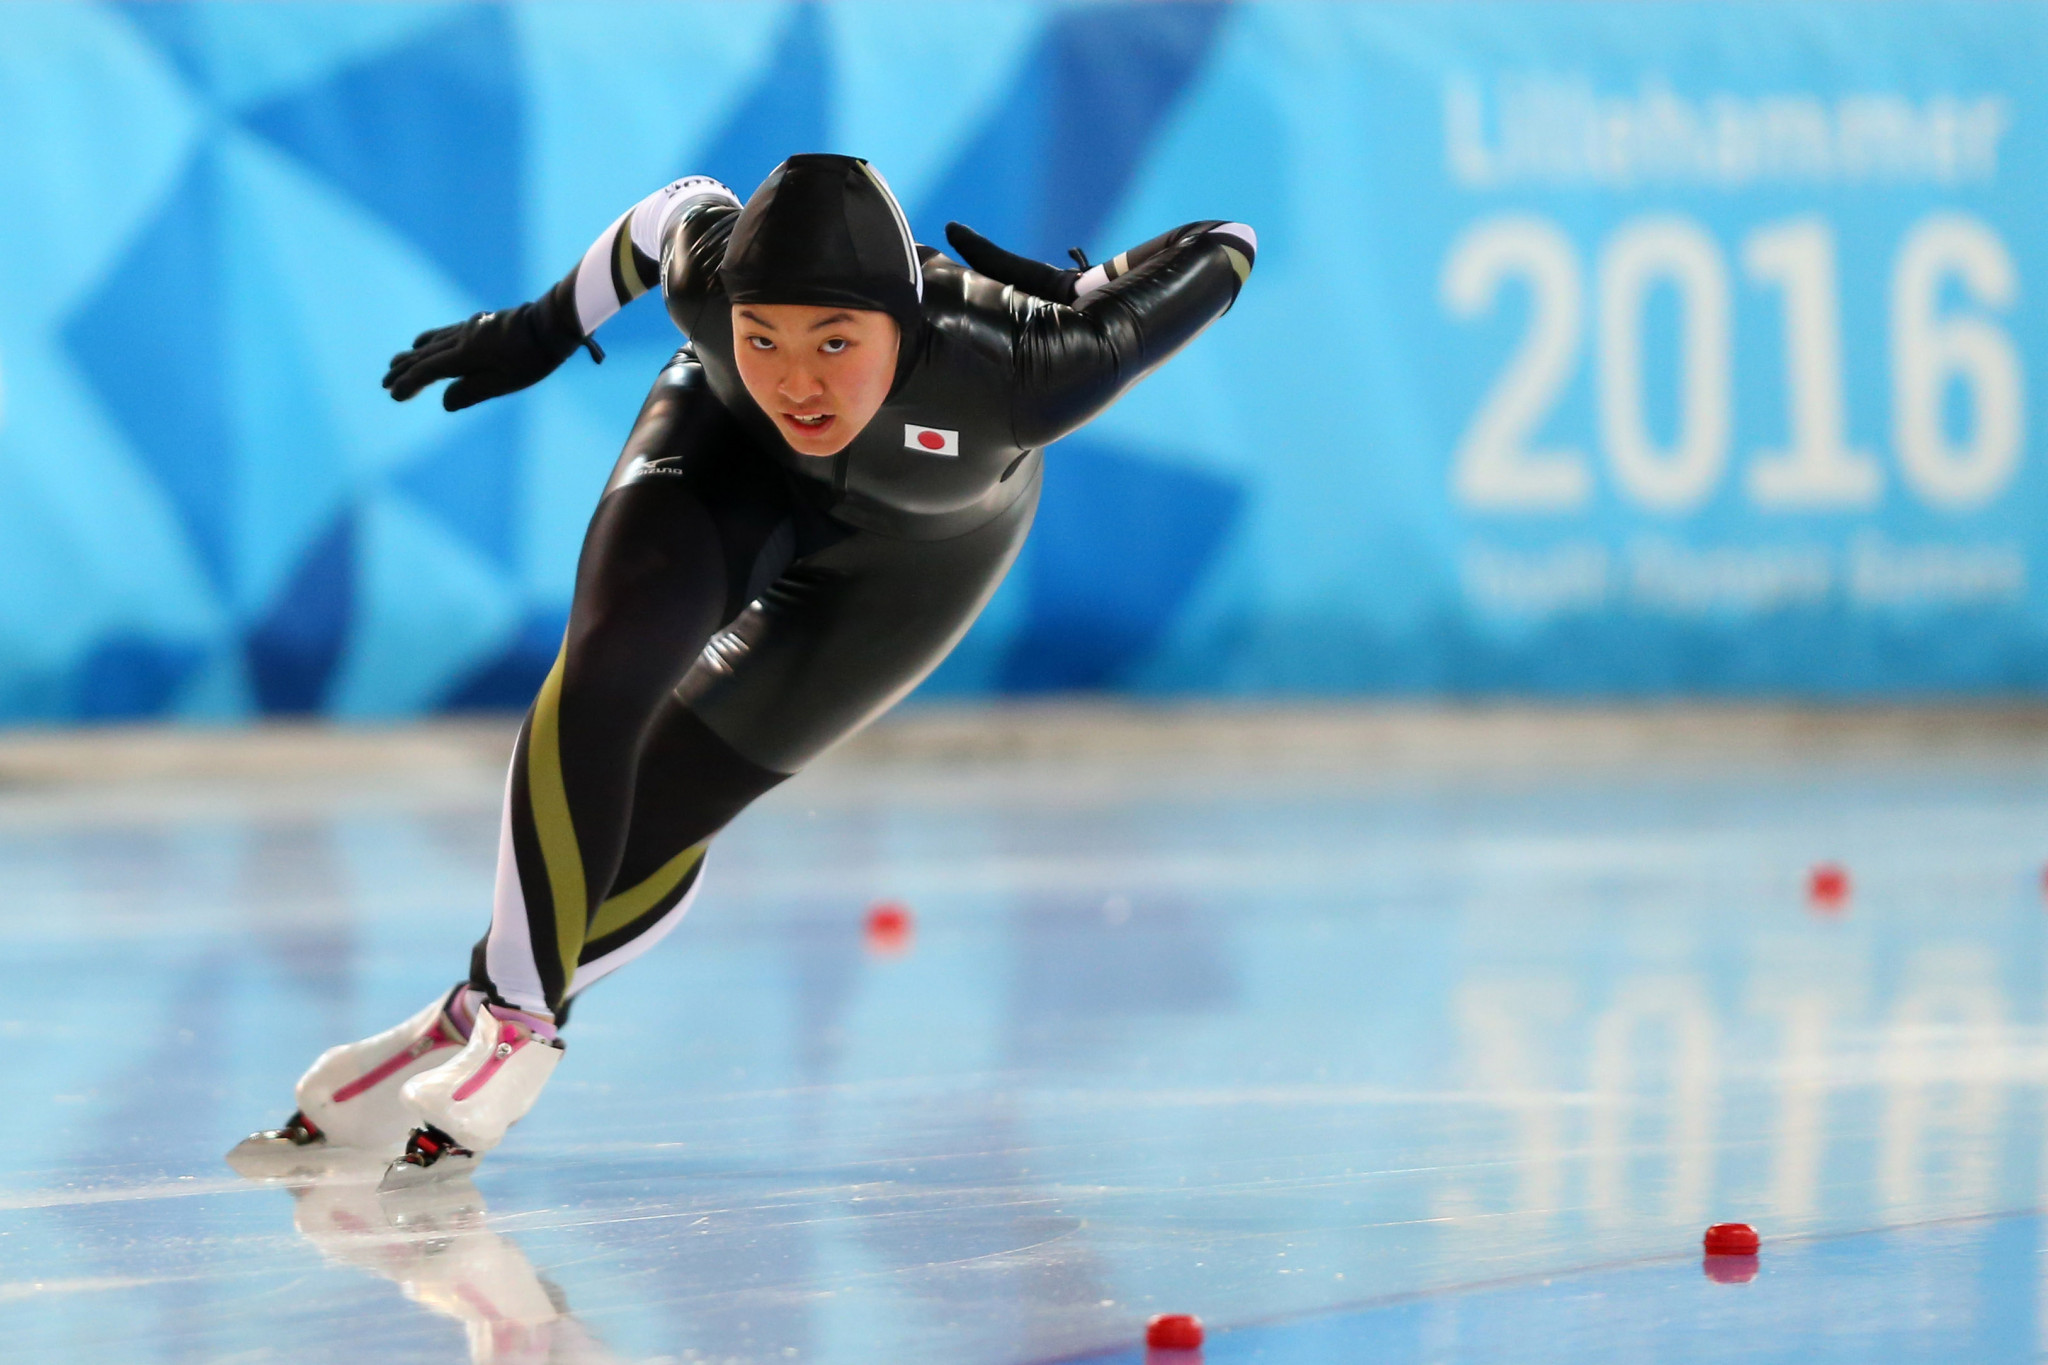 Lausanne 2020 organisers have reassured speed skaters due to compete in the Youth Olympics that Lake St Moritz is sufficiently frozen to host the event ©Getty Images